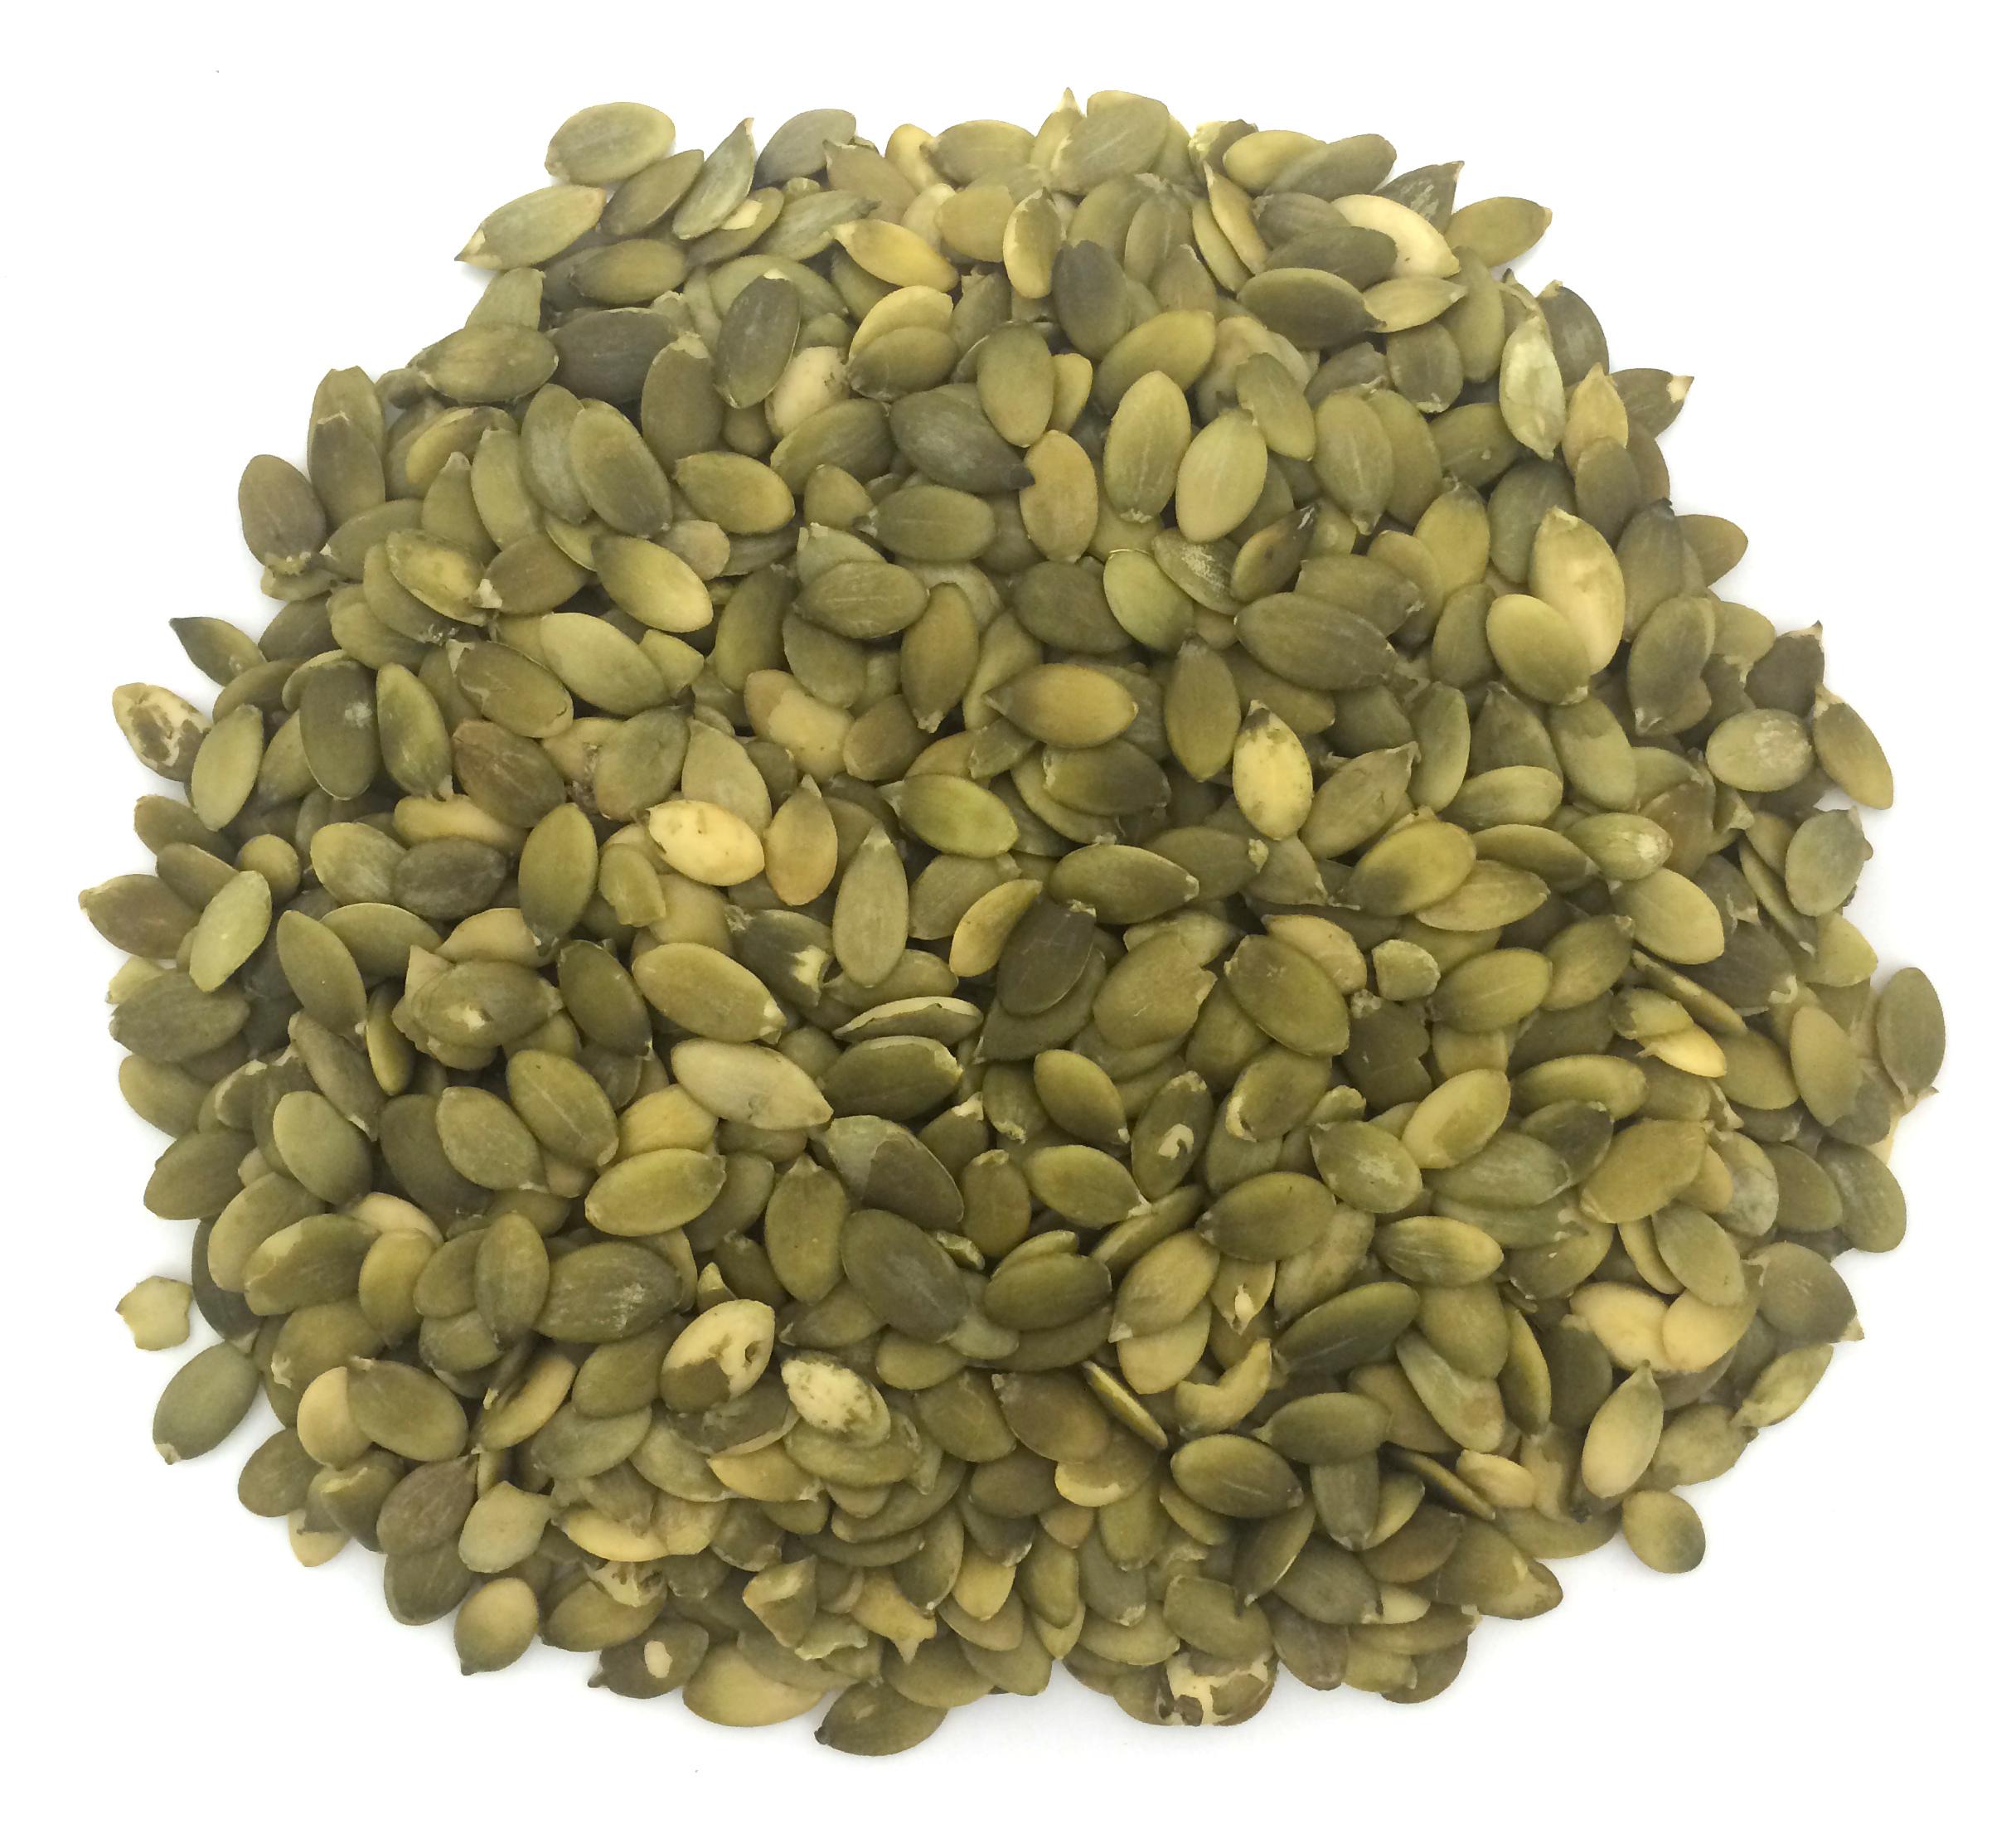 Product Organic Raw Sprouted Pumpkin Seeds - Healthy Truth image